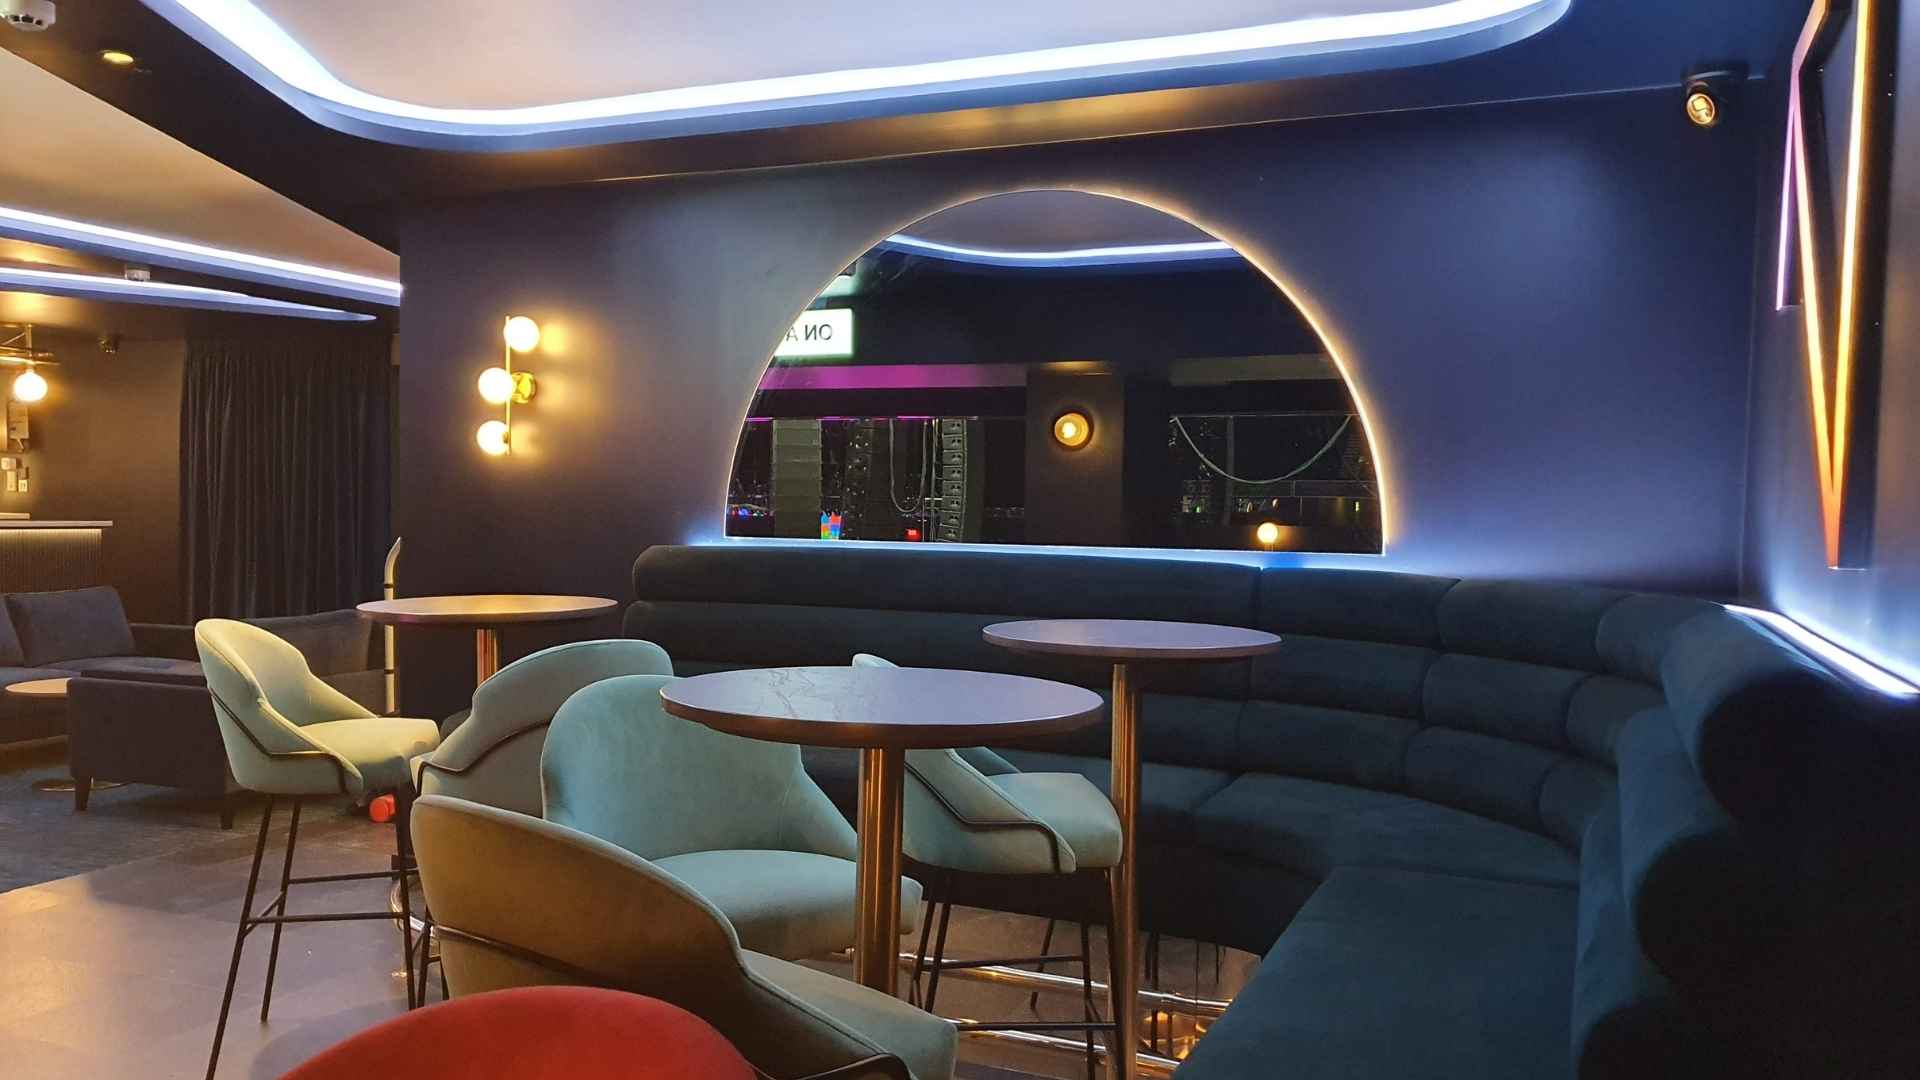 ao arena's executive lounge refit with bespoke seating, tables and lighting